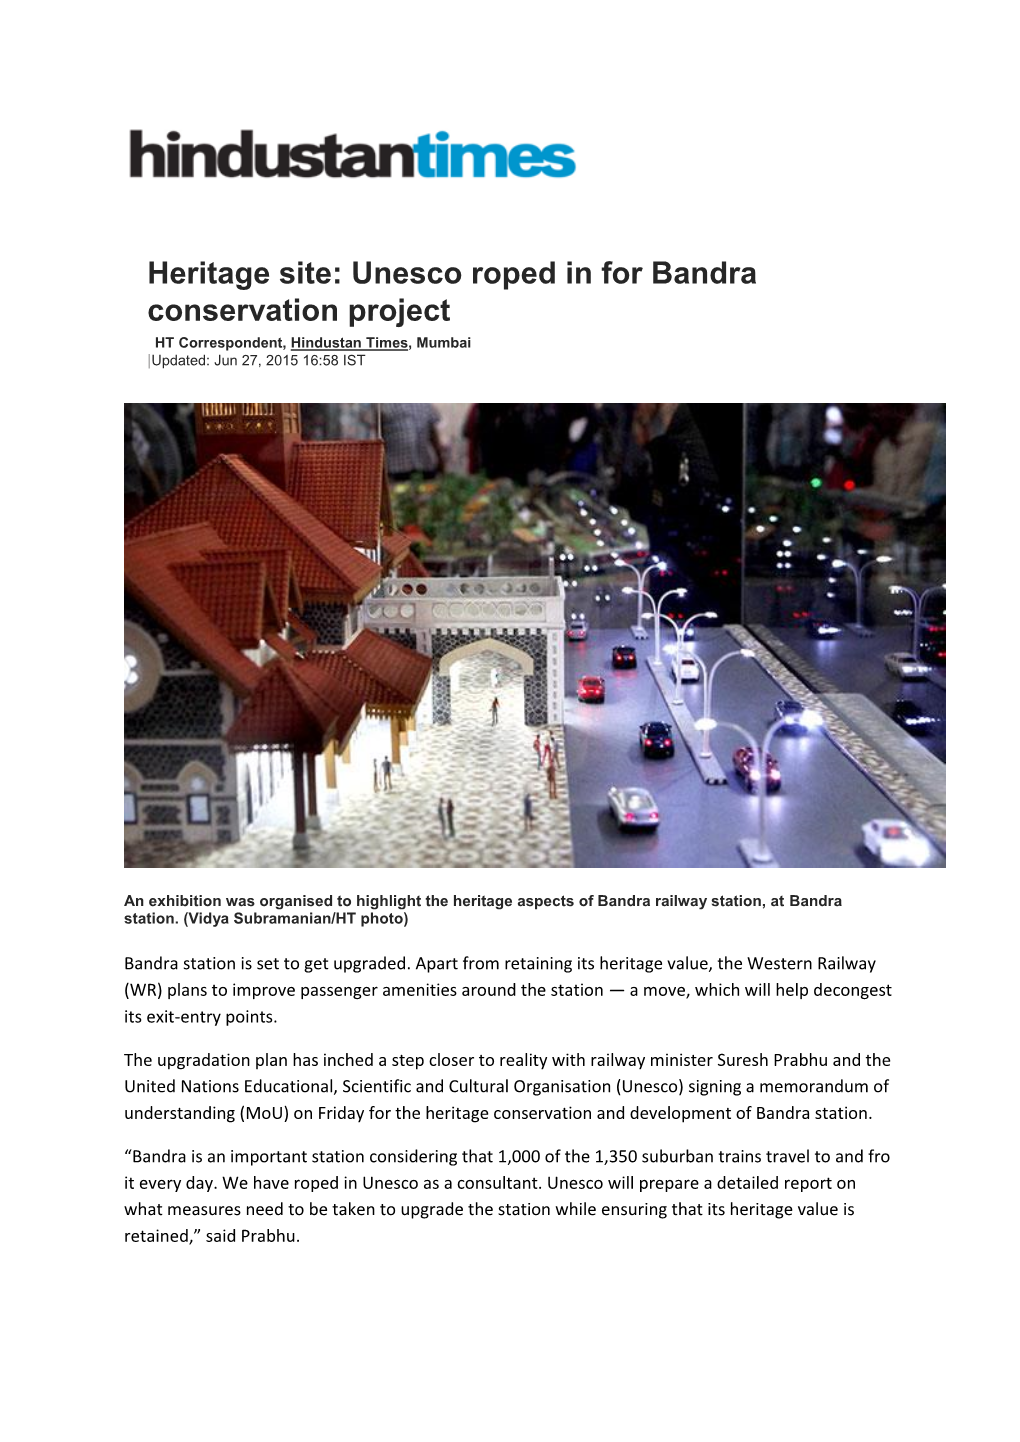 Heritage Site: Unesco Roped in for Bandra Conservation Project HT Correspondent, Hindustan Times, Mumbai |Updated: Jun 27, 2015 16:58 IST